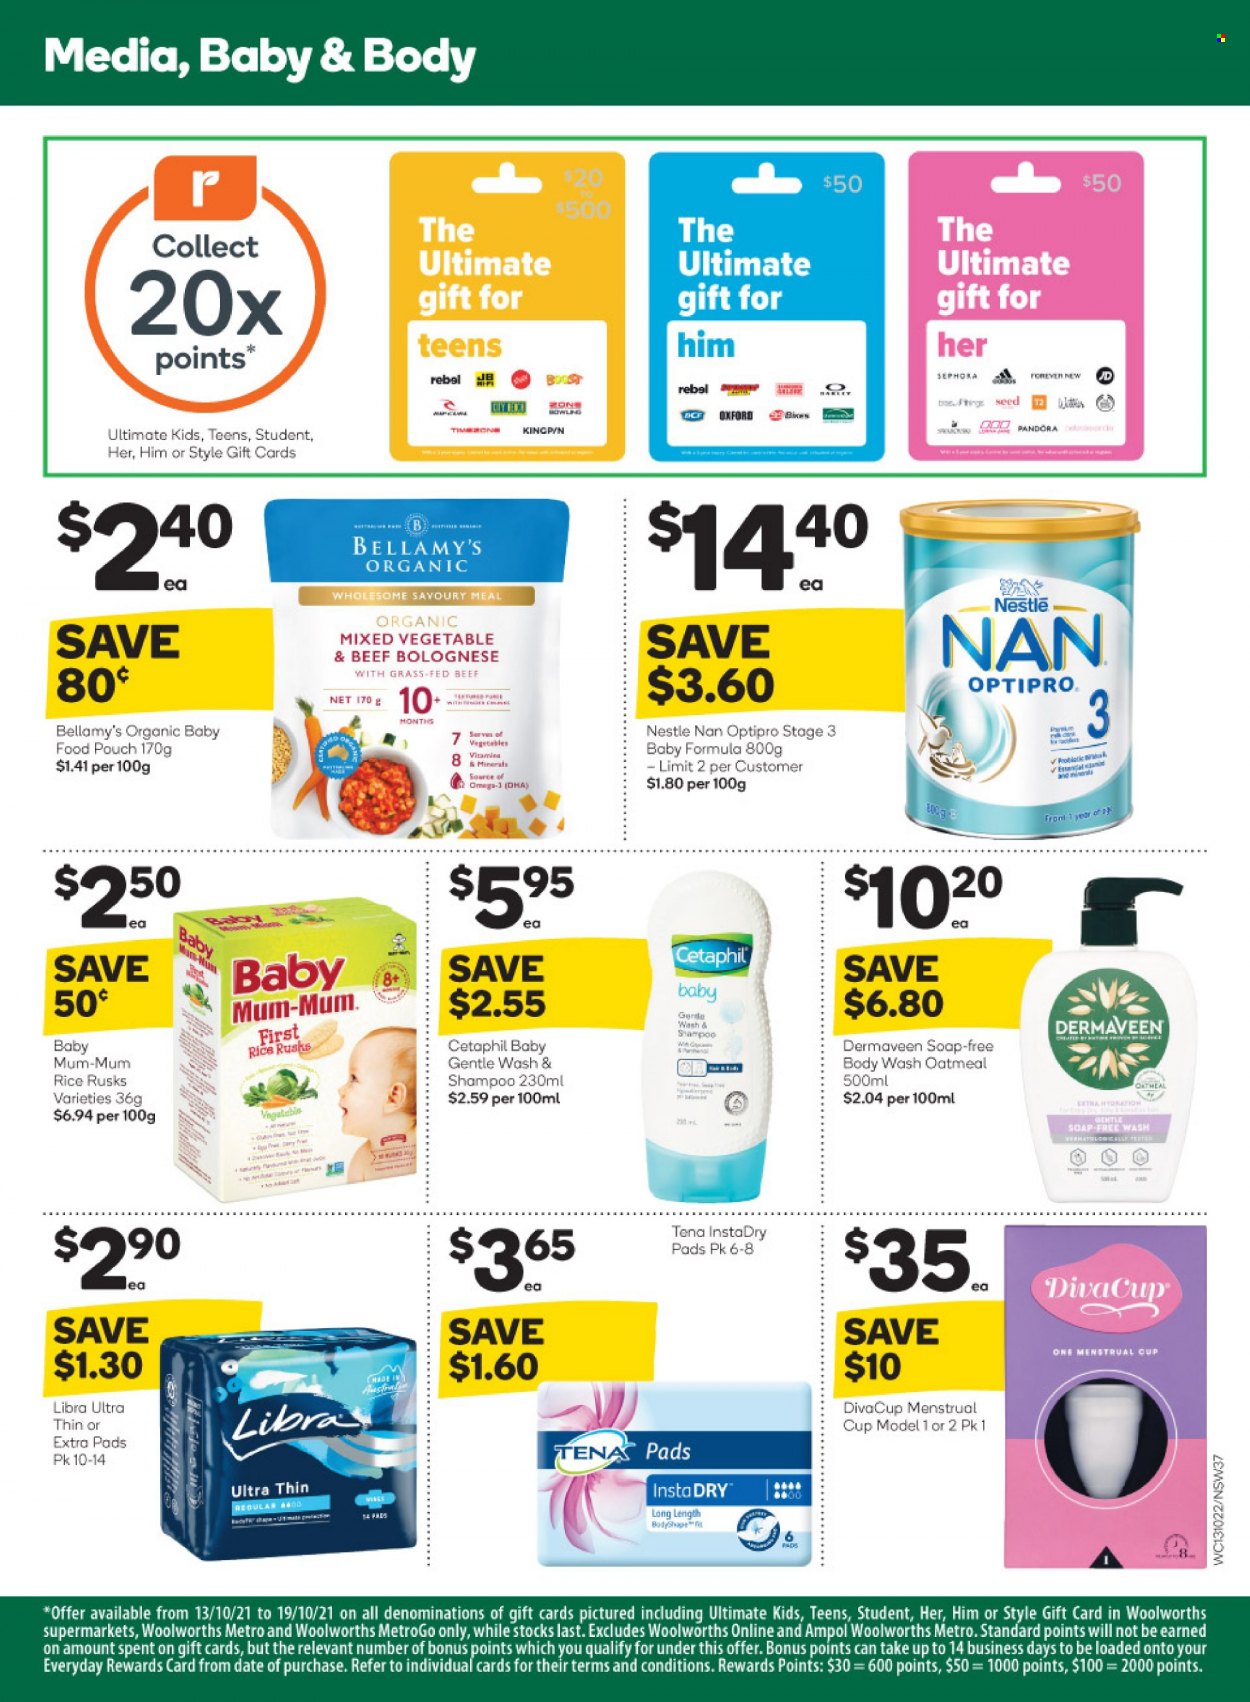 thumbnail - Woolworths Catalogue - 13 Oct 2021 - 19 Oct 2021 - Sales products - rusks, mixed vegetables, Nestlé, oatmeal, Boost, Nestlé NAN, baby food pouch, organic baby food, body wash, shampoo, soap, Tena Lady, Mum, cup, plant seeds. Page 37.